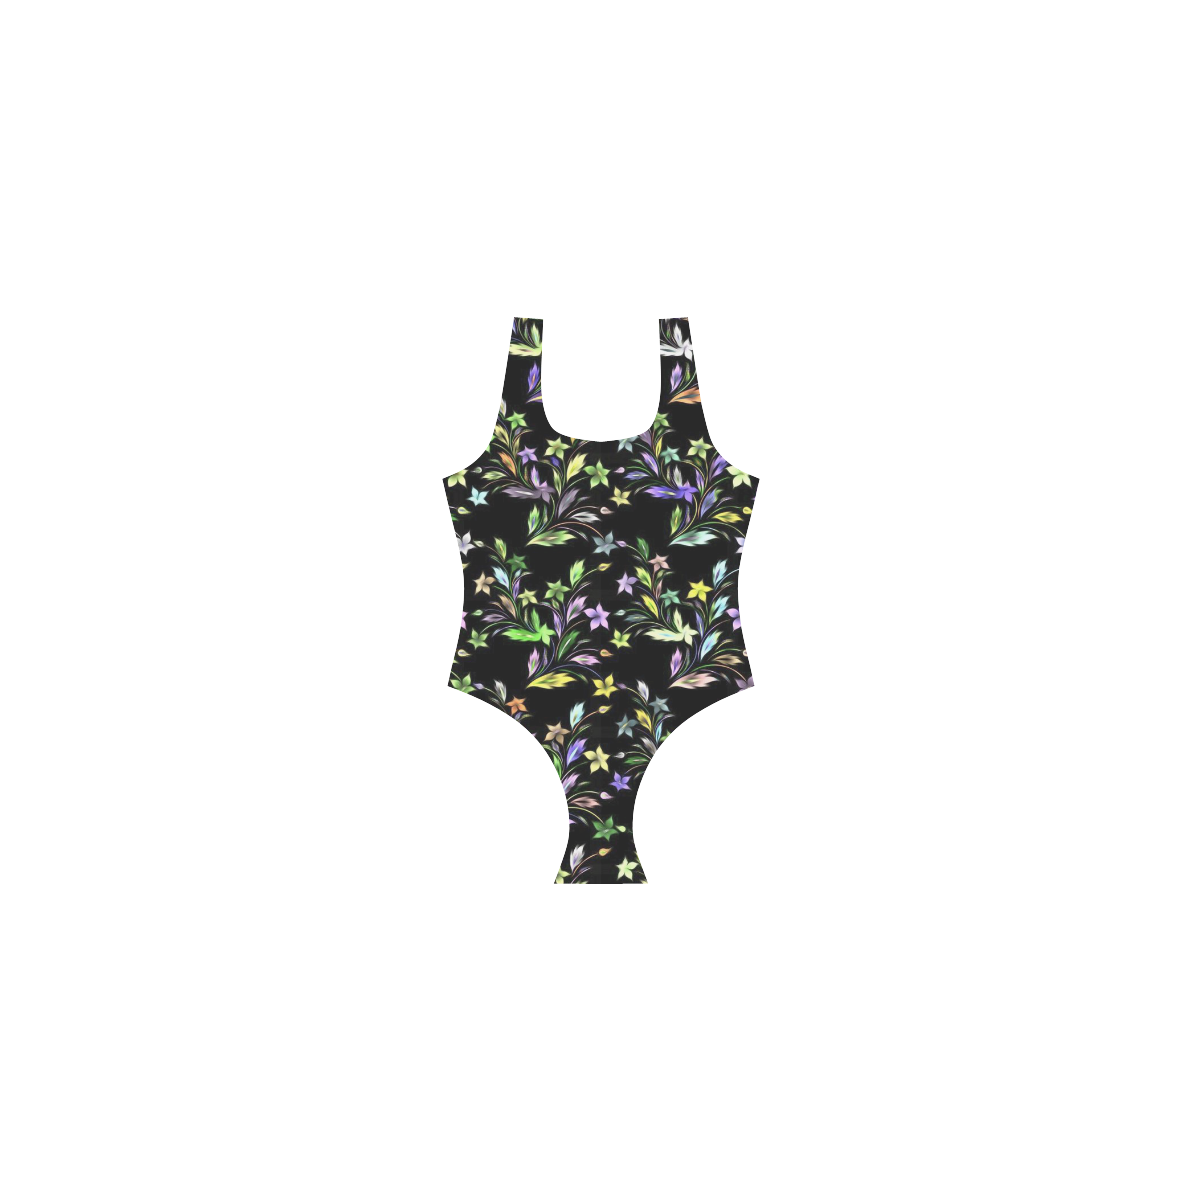 Vivid floral pattern 4182C by FeelGood Vest One Piece Swimsuit (Model S04)